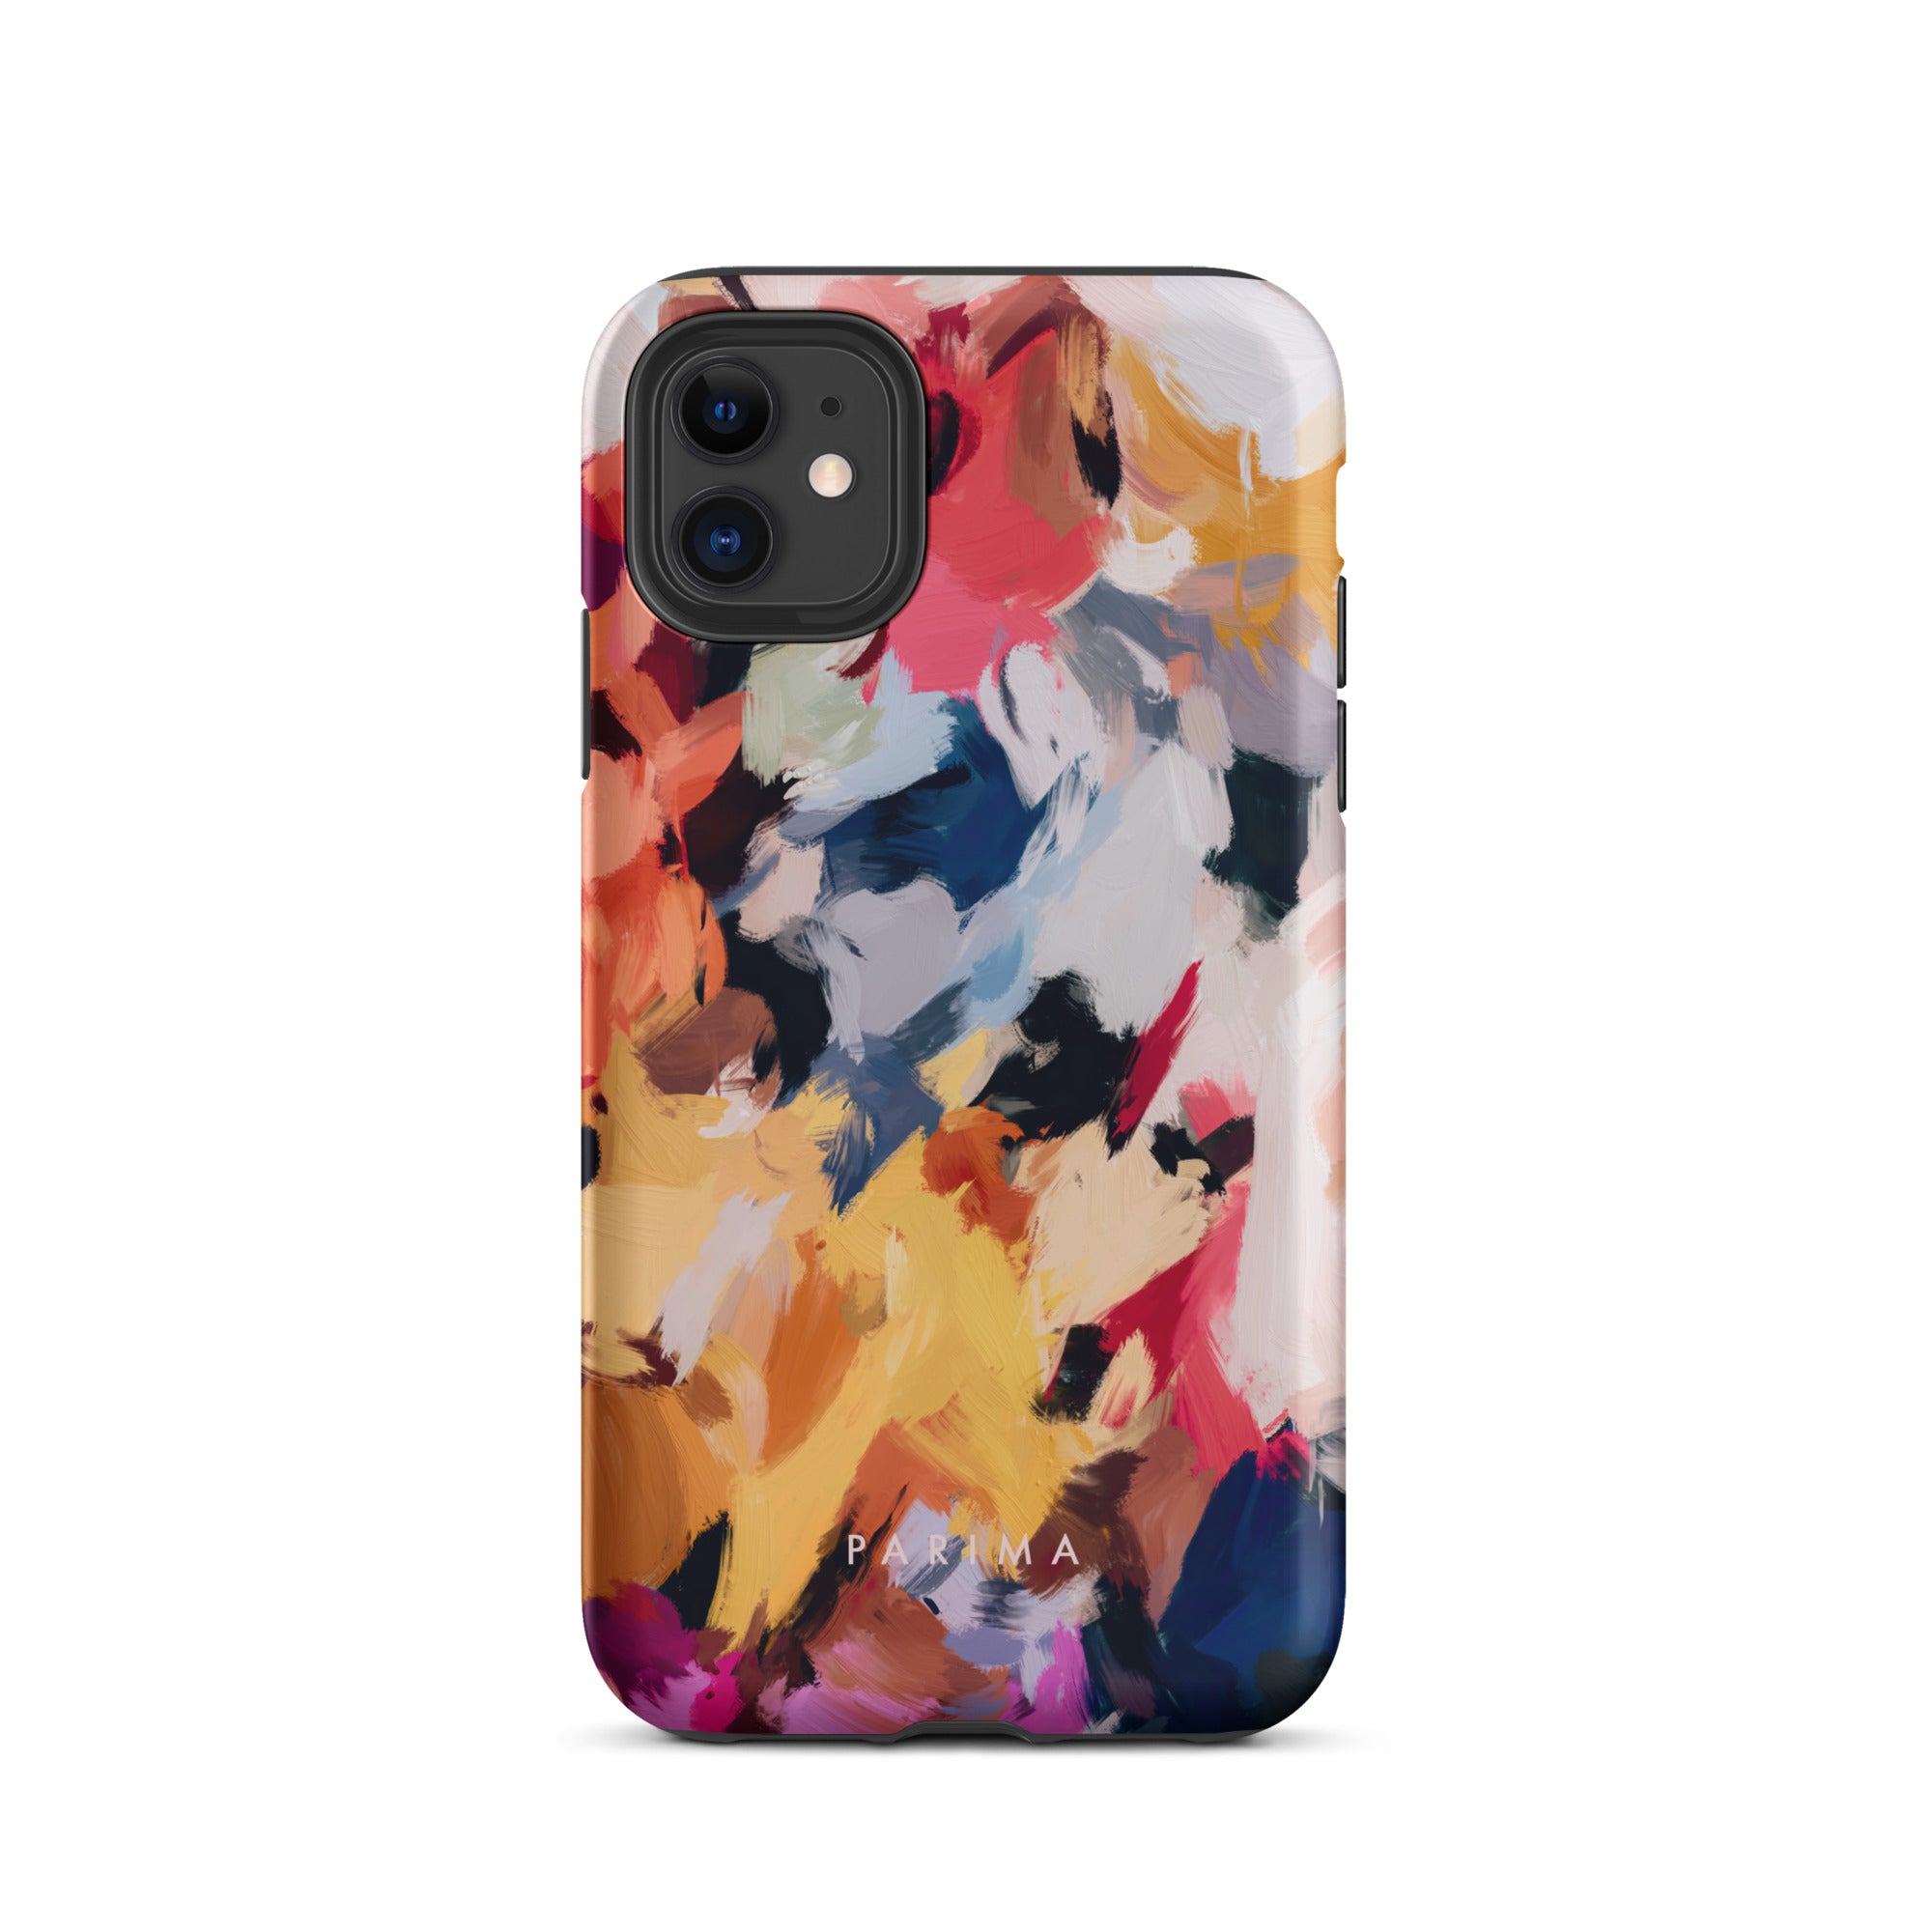 Wilde, blue and yellow abstract art on iPhone 11 tough case by Parima Studio